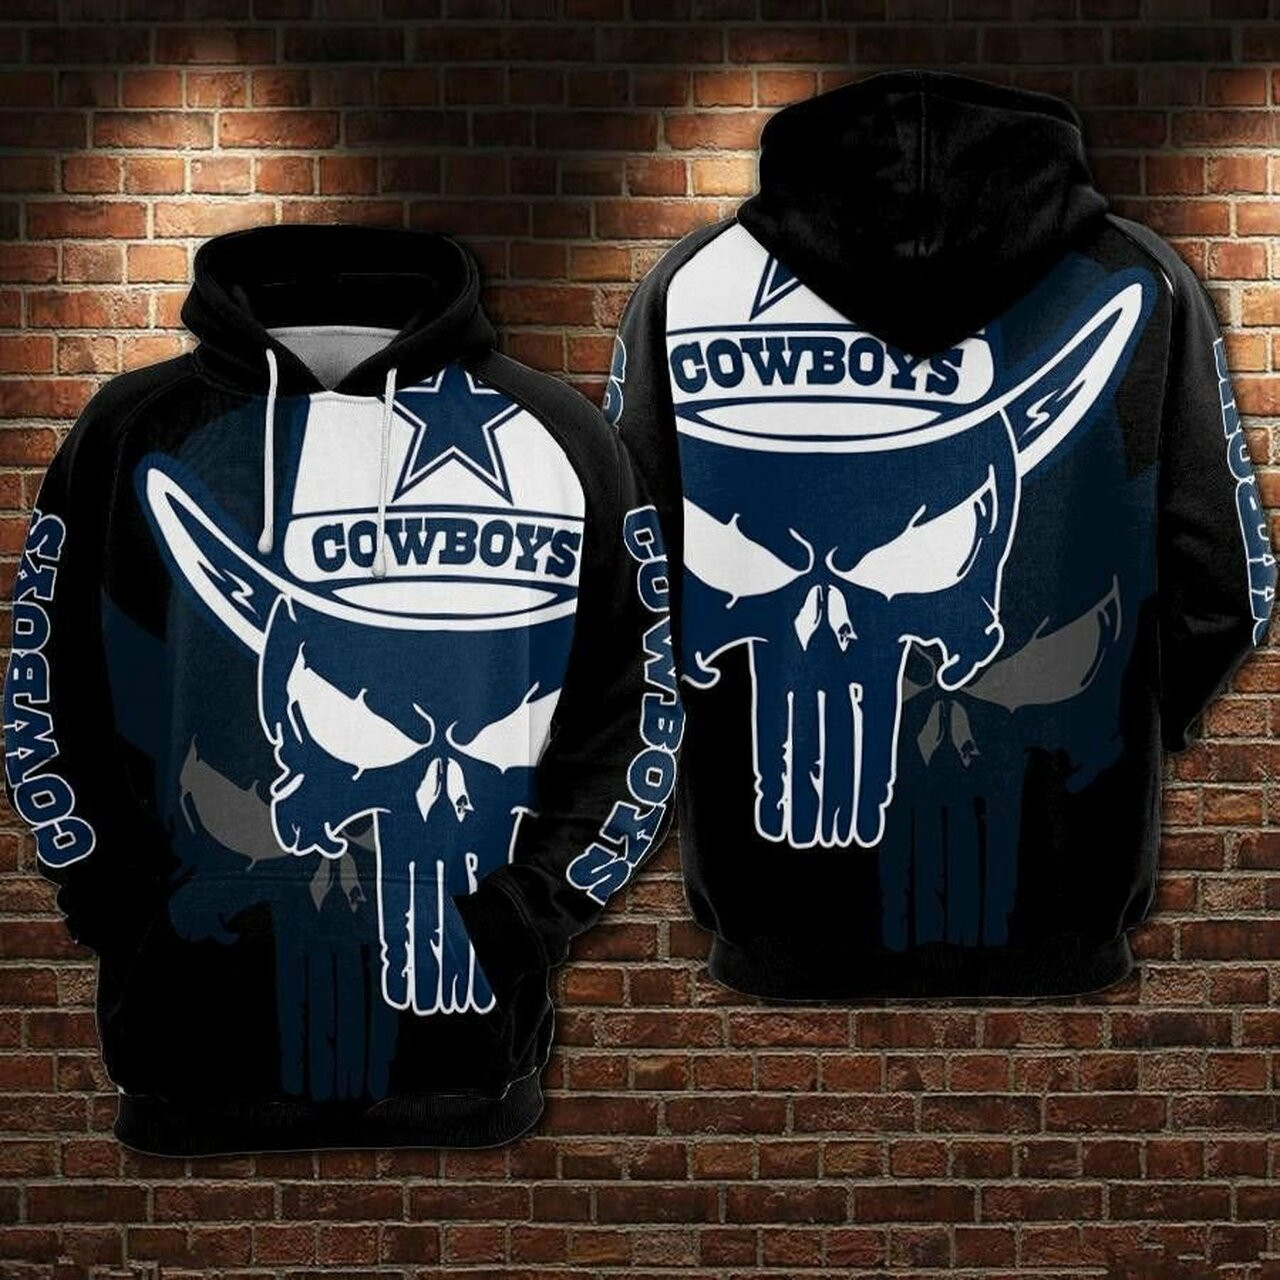 Dallas Cowboys Nfl Punisher Skull Black Men And Women 3d Full Printing Pullover Hoodie And Zippered Dallas Cowboys 3d Full Printing Shirt 2020